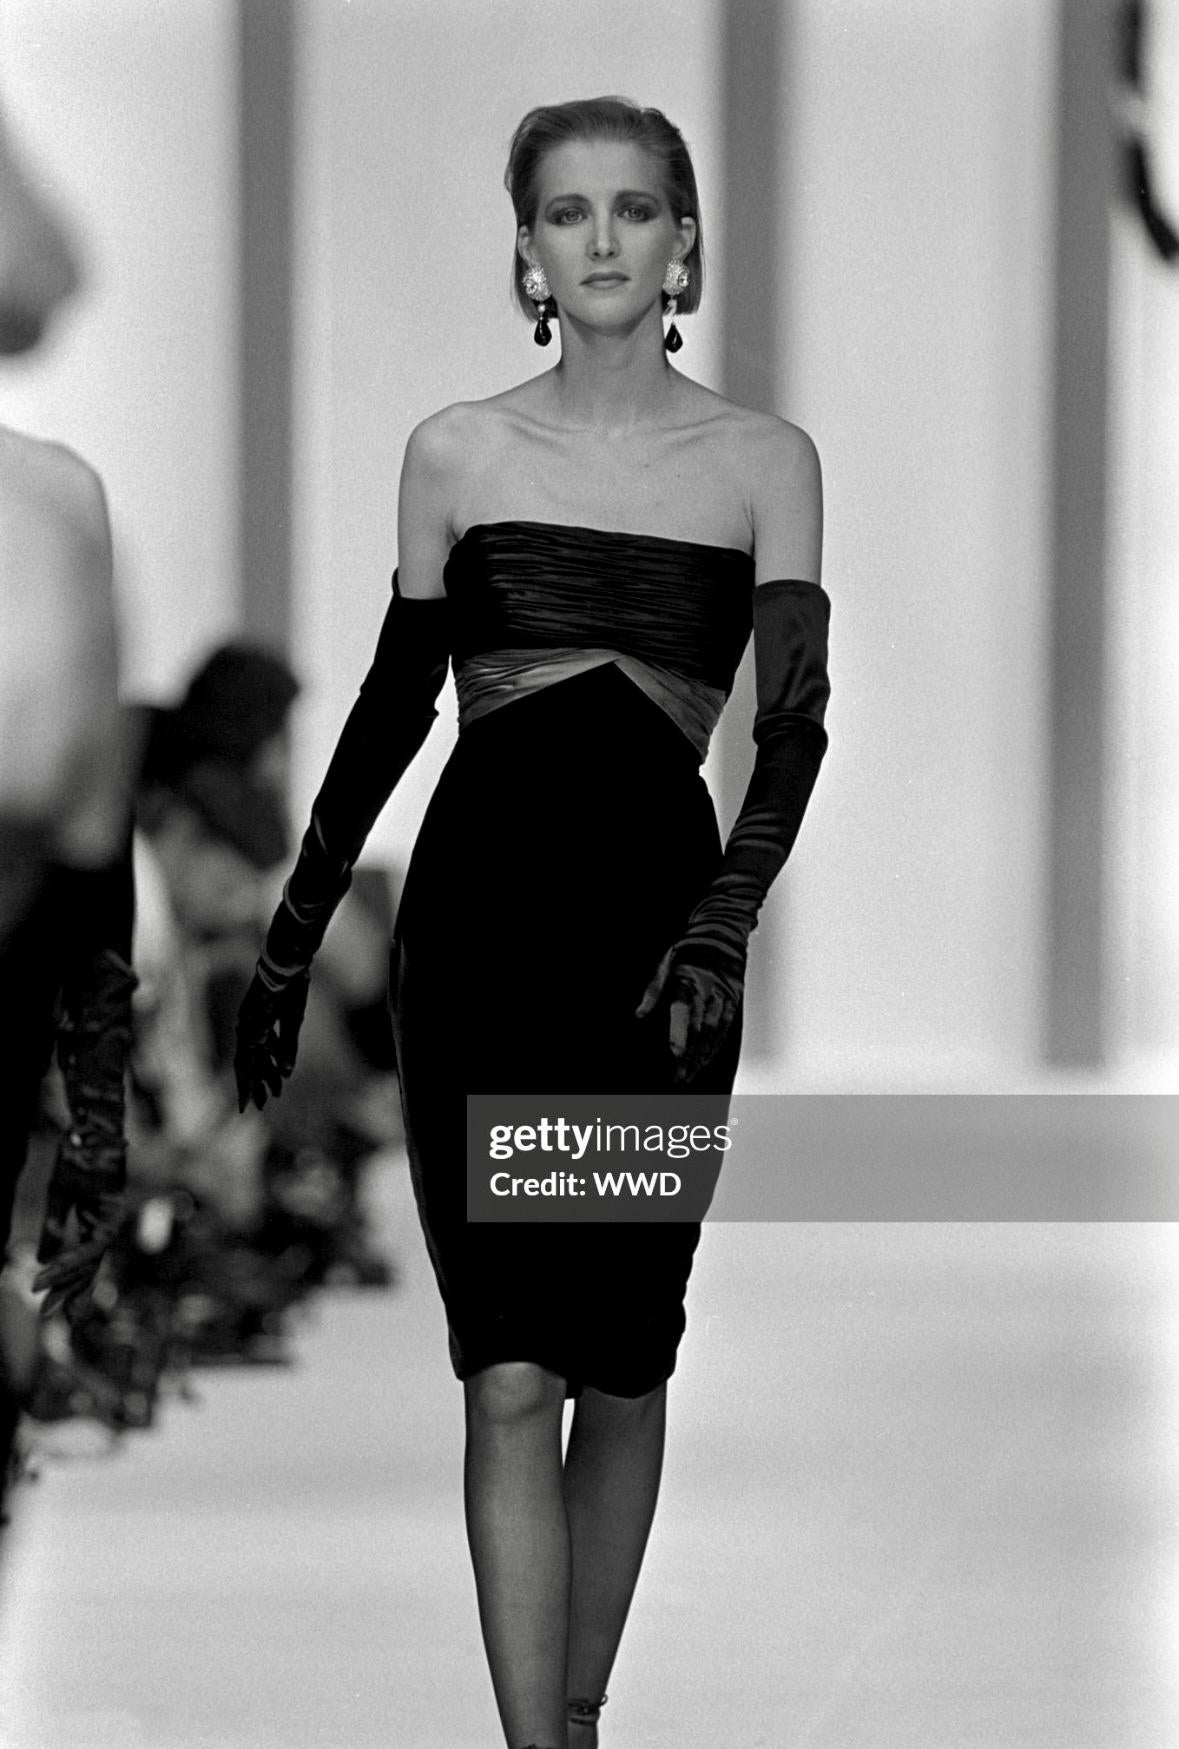 From the Fall/Winter 1985 collection, this elegant strapless Valentino dress debuted on the season's runway. This chic dress combines black and white silk ruching that drapes gracefully around the bust, accented by a perfectly placed bow at the